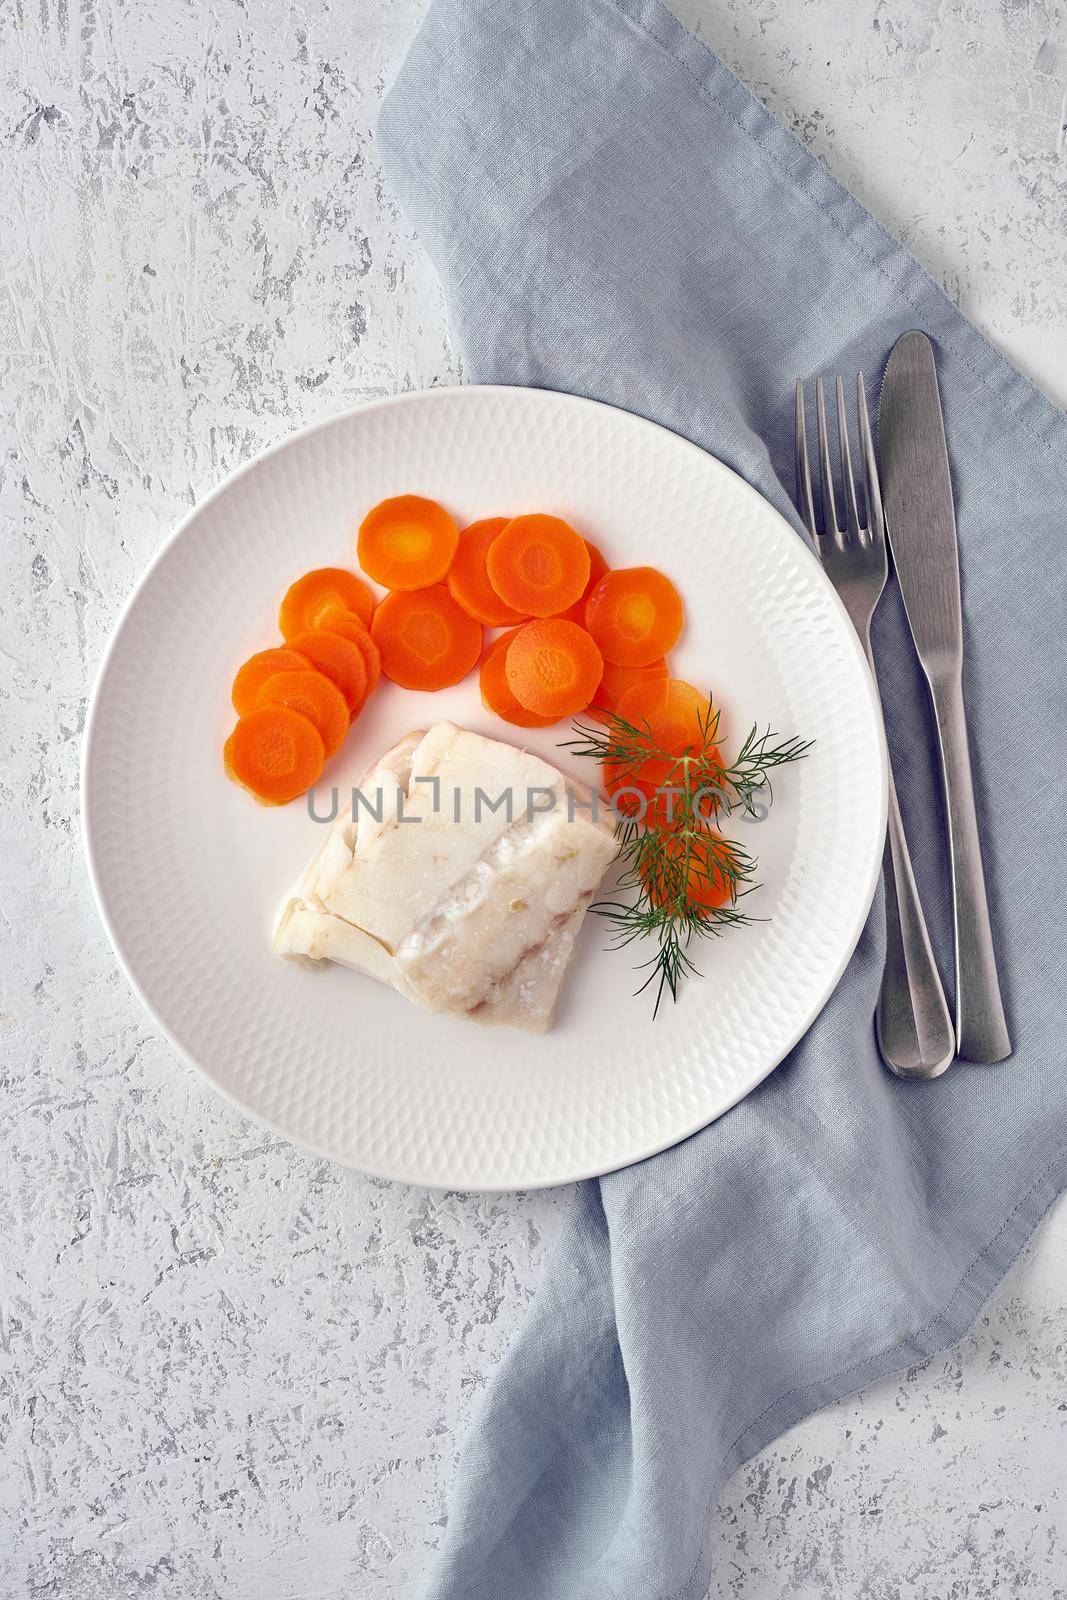 steamed codfish full of vitamins with carrot and dill, healthy diet, fodmap dash and paleo